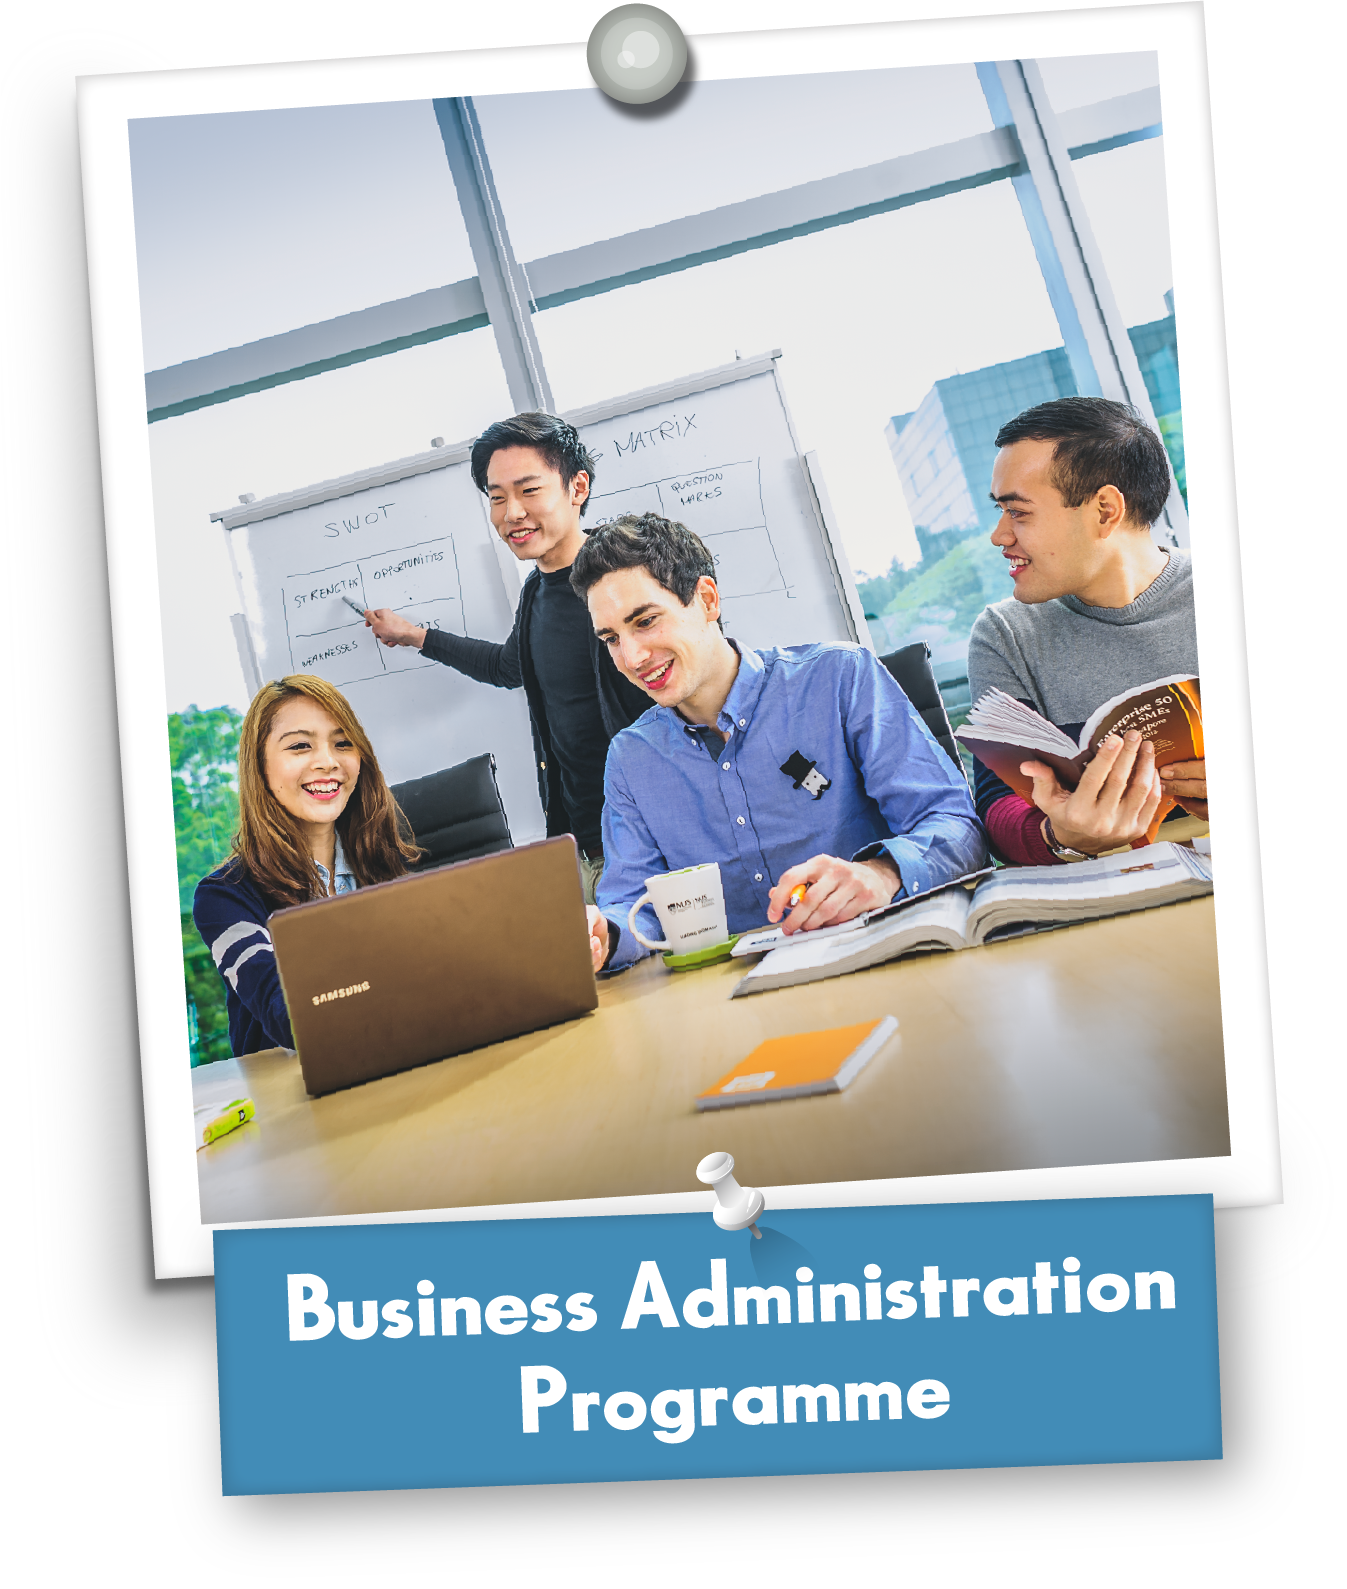 Business Administration Programme